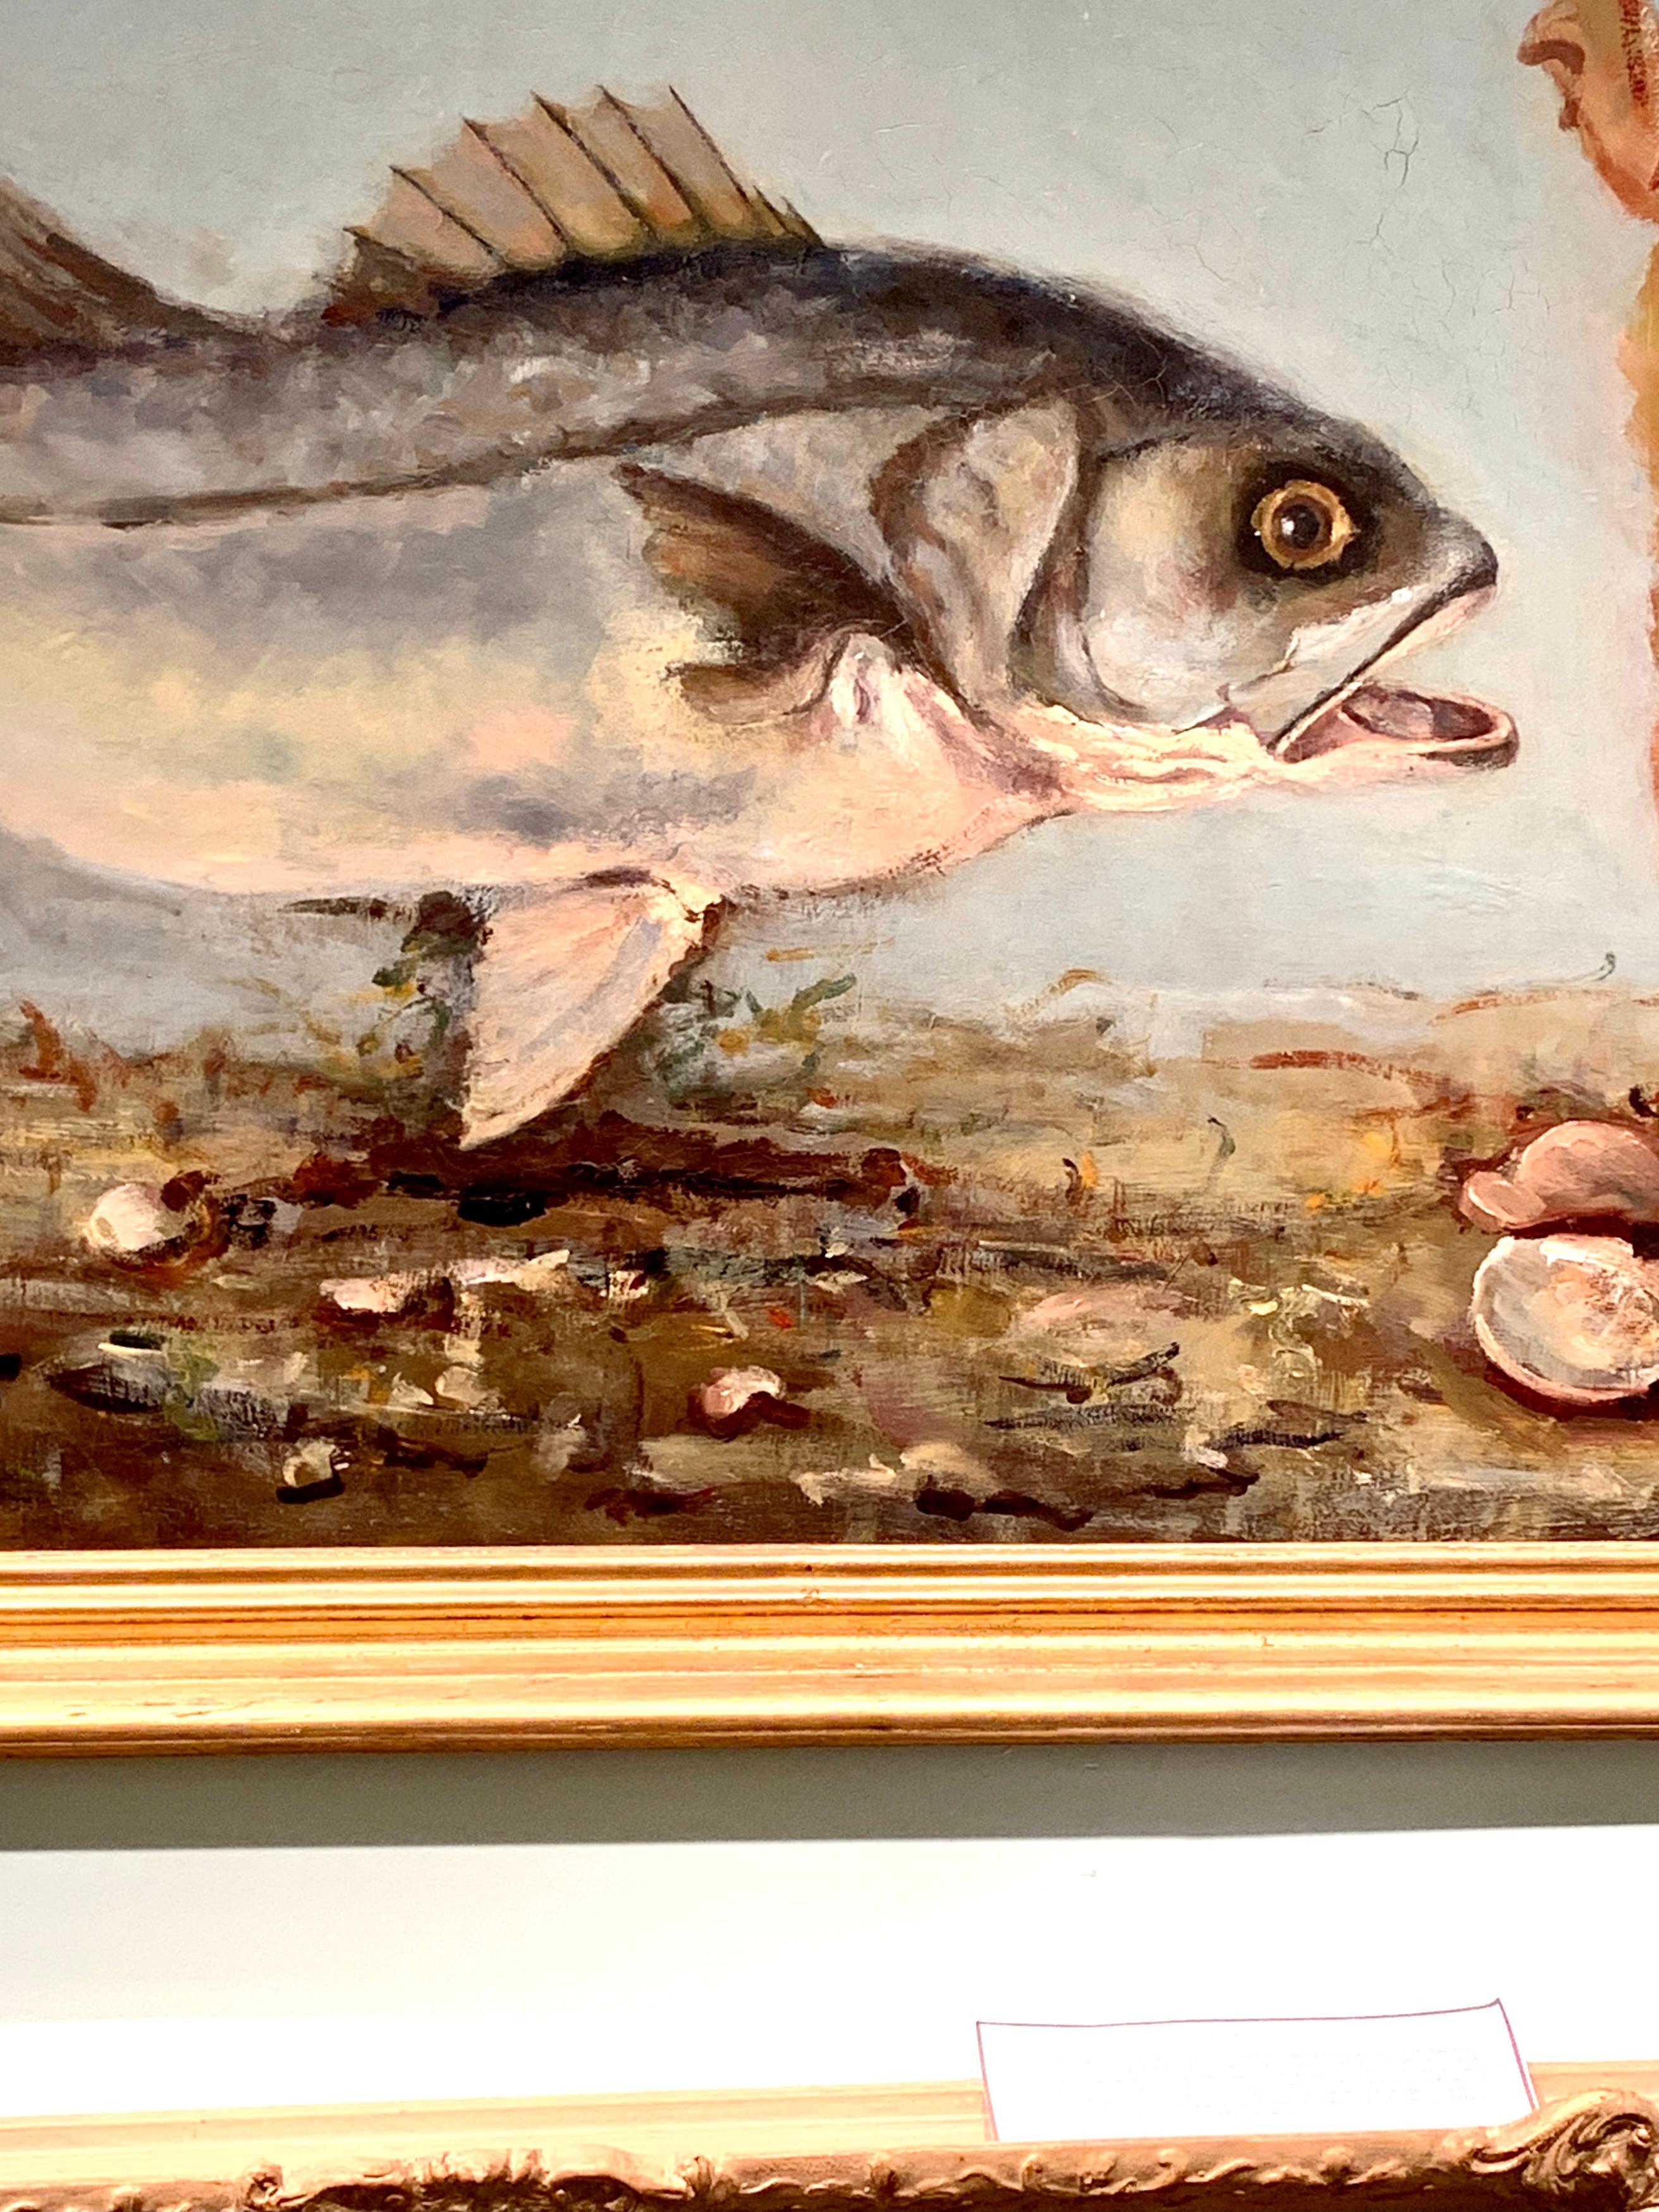 American Impressionist Portrait of a Fish swimming, possibly a carp or Bass - Painting by Harry Sutton